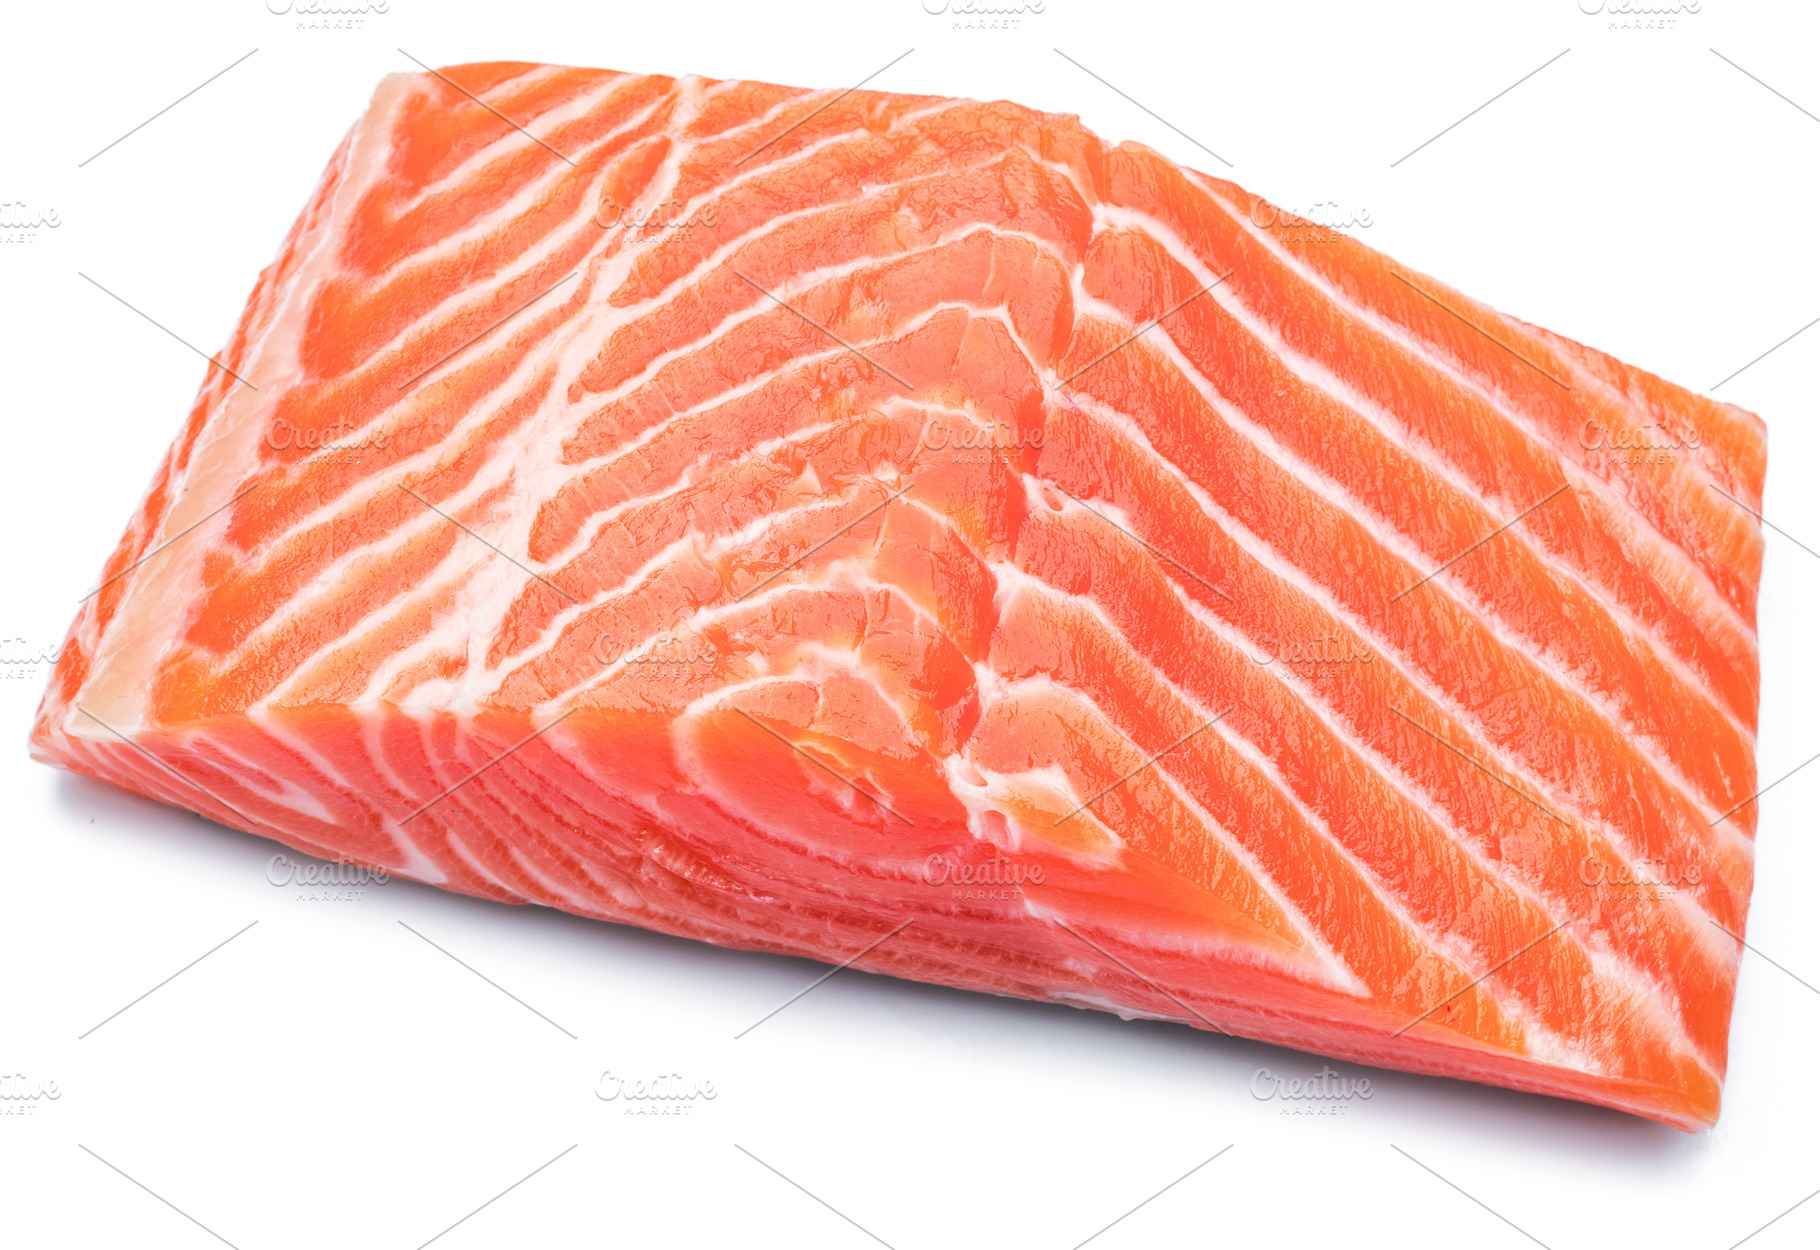 Fresh raw salmon fillet on white bac | High-Quality Food Images ...